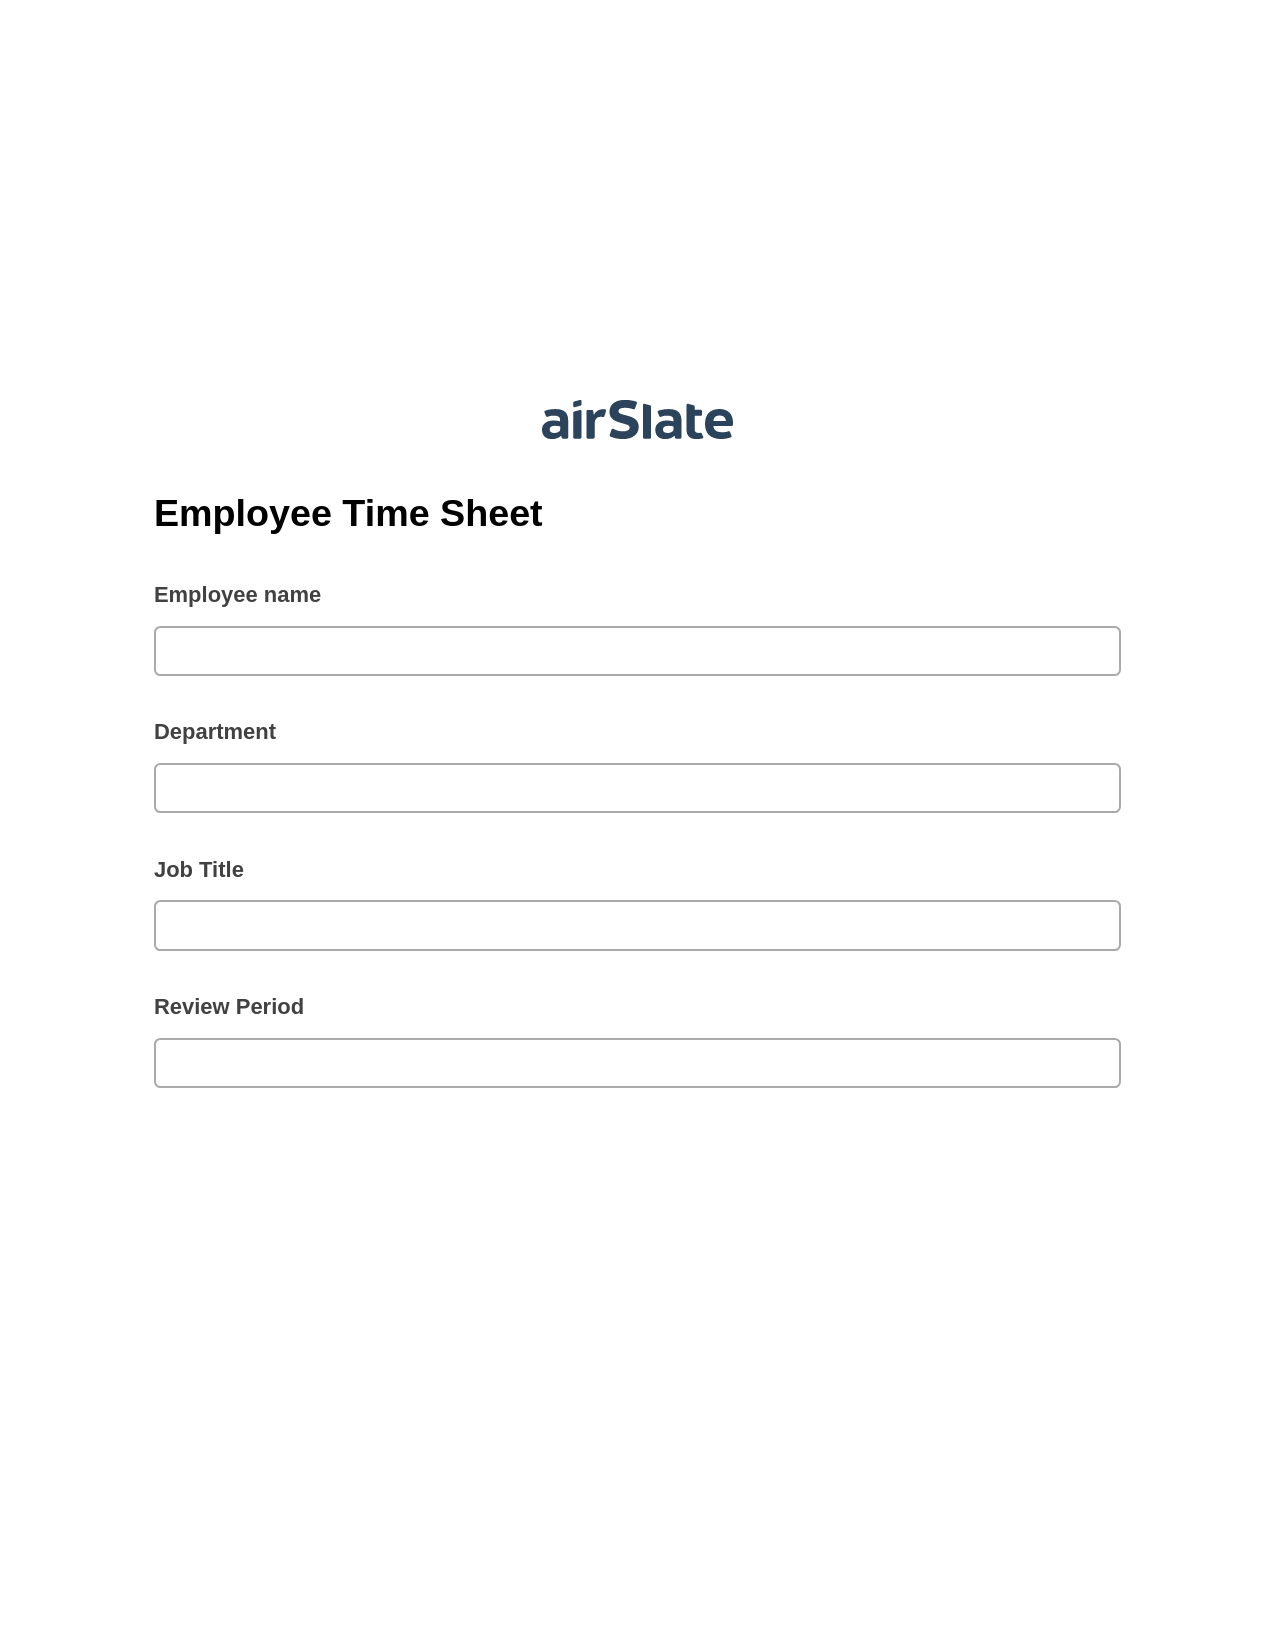 Multirole Employee Time Sheet Pre-fill from Salesforce Records Bot, Create Salesforce Records Bot, Export to Salesforce Record Bot